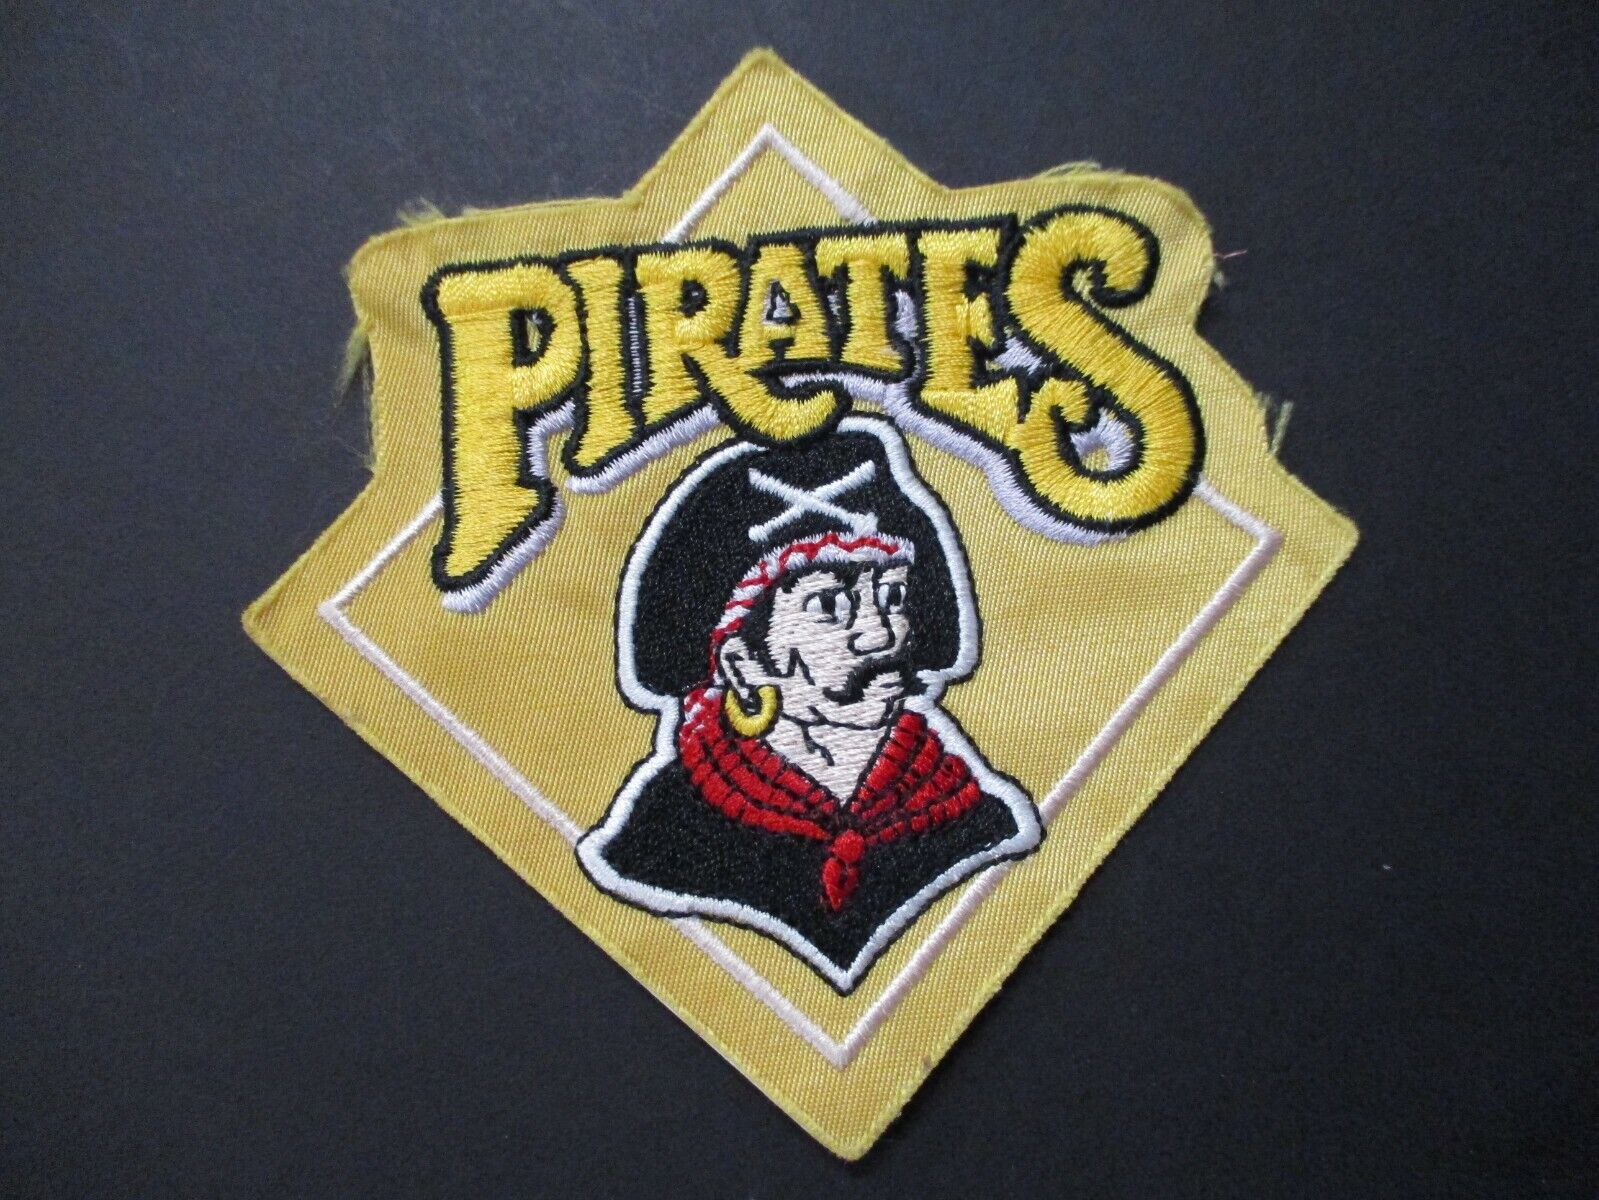 Pittsburgh Pirates Patch Size 4 x 4 inches Yellow Logo